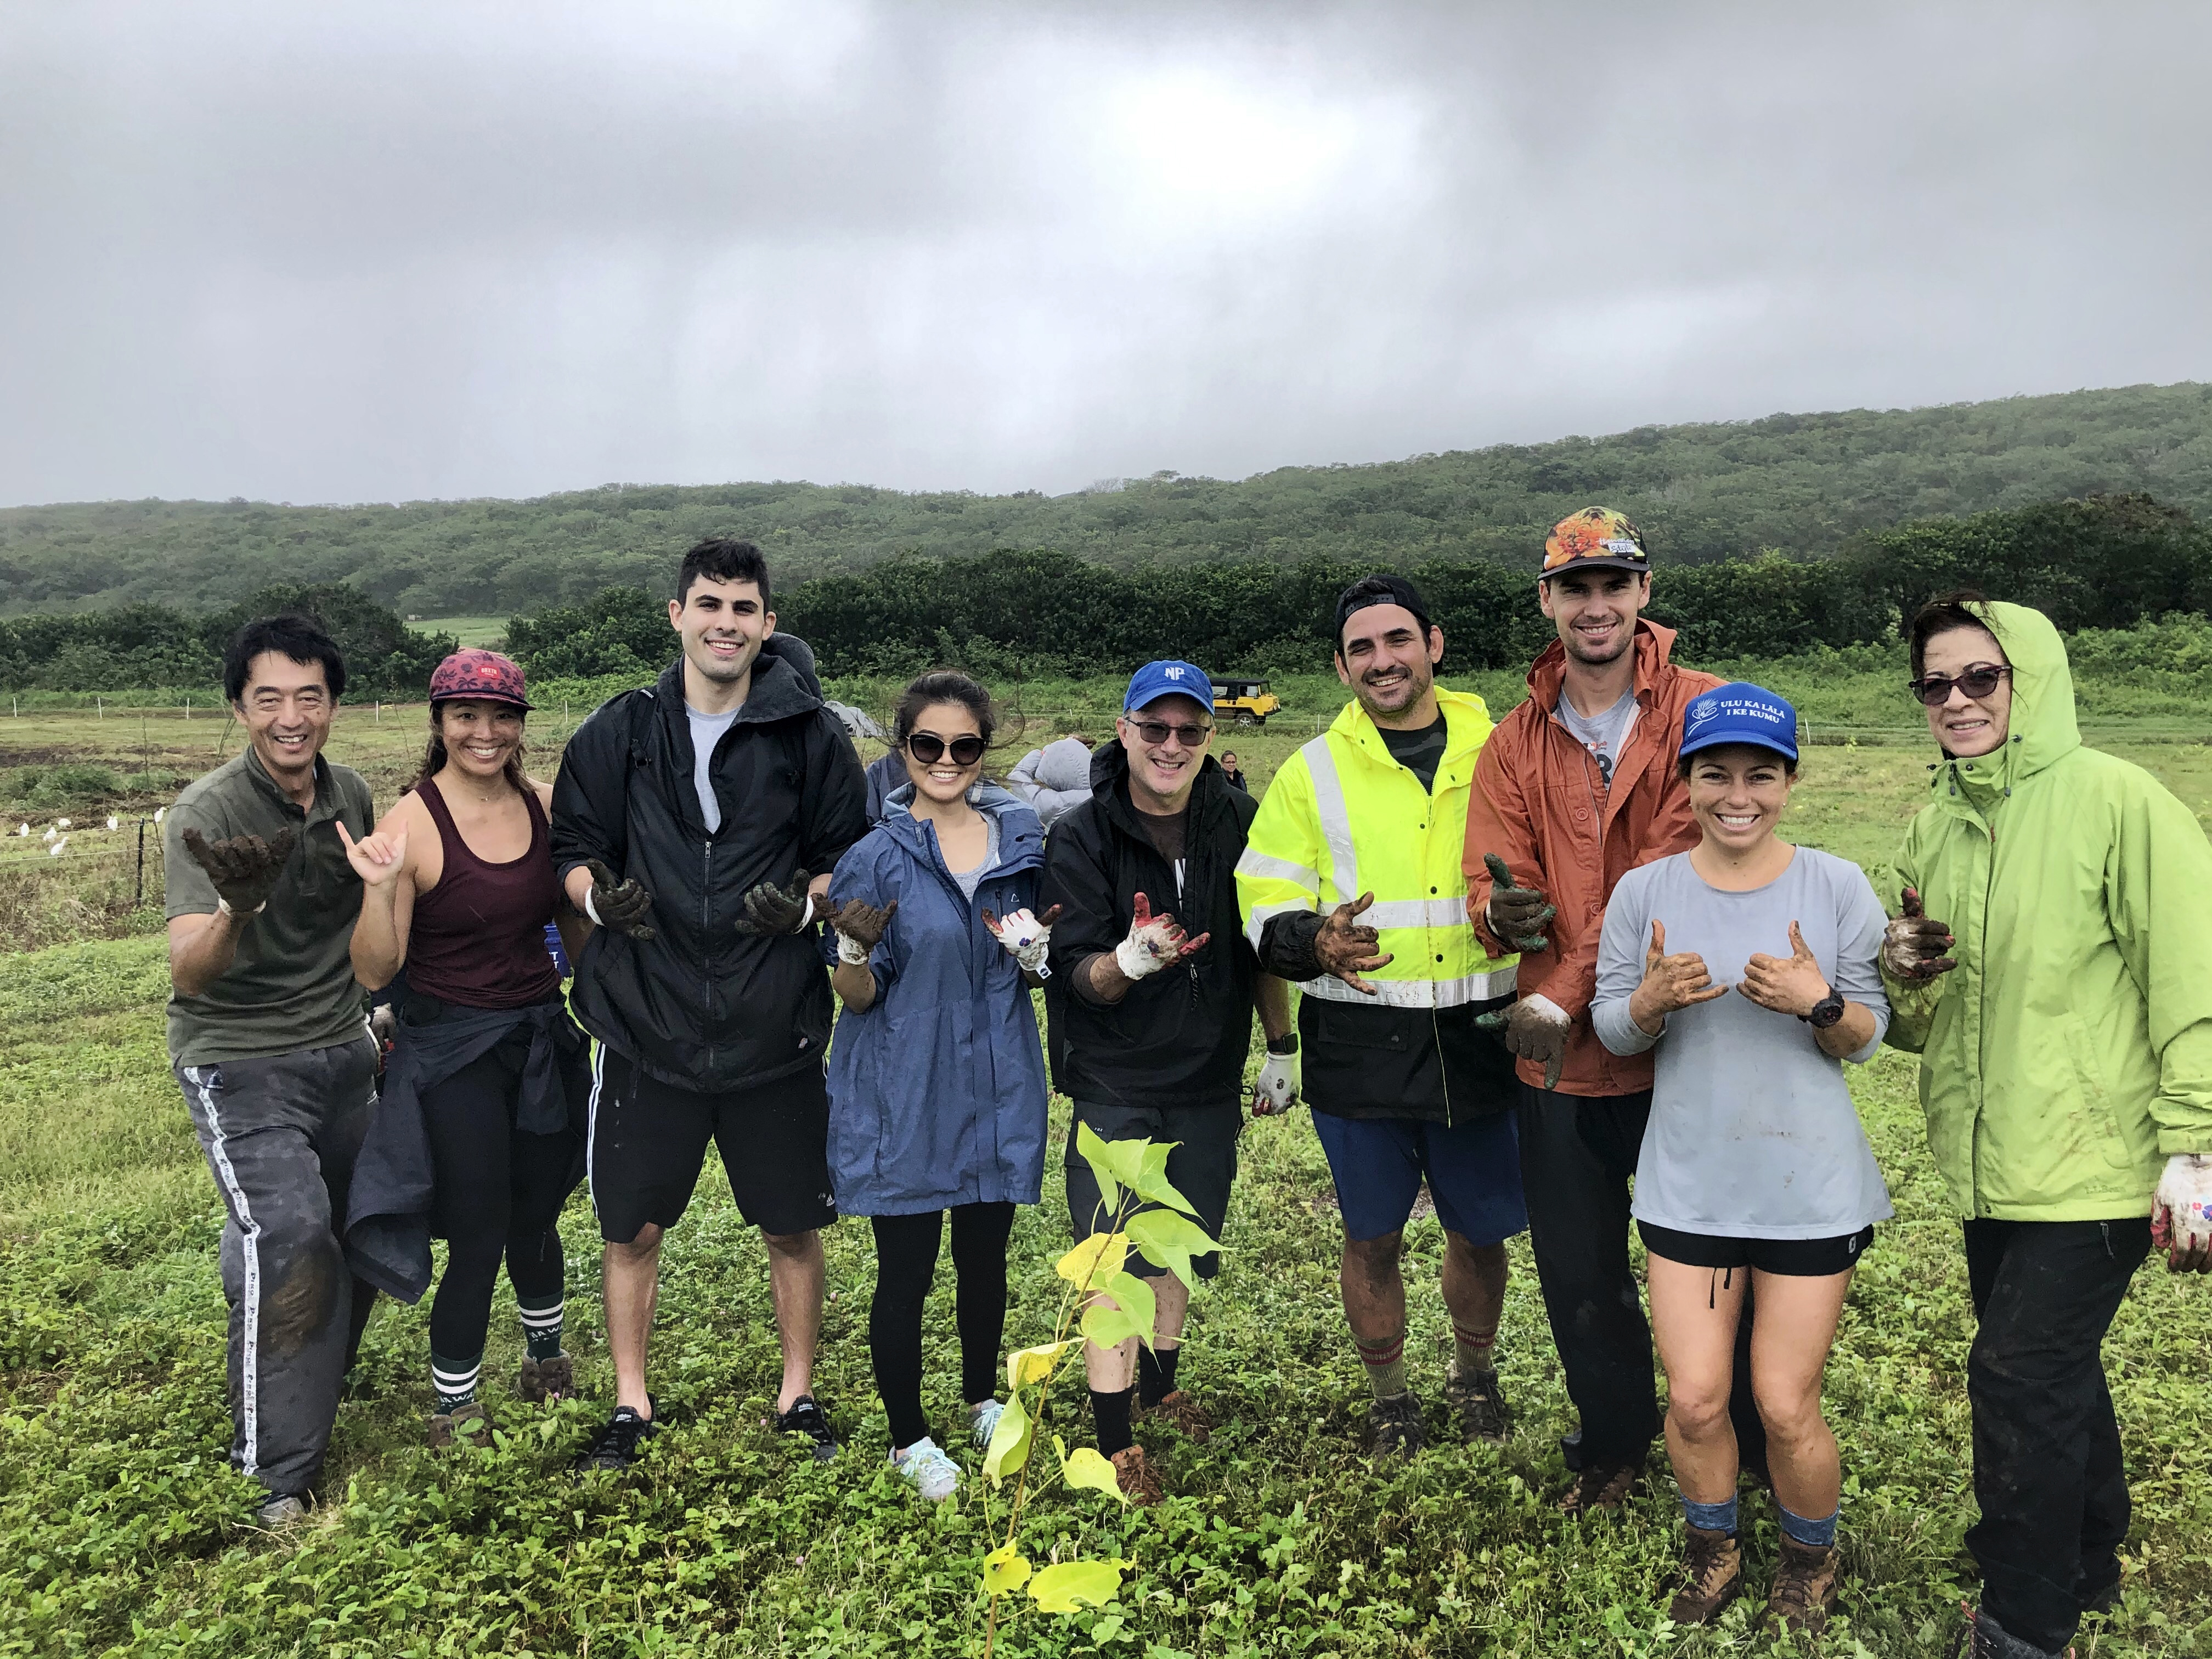 KYA joins ANA in planting 250 Milo trees on Oahu’s north shore